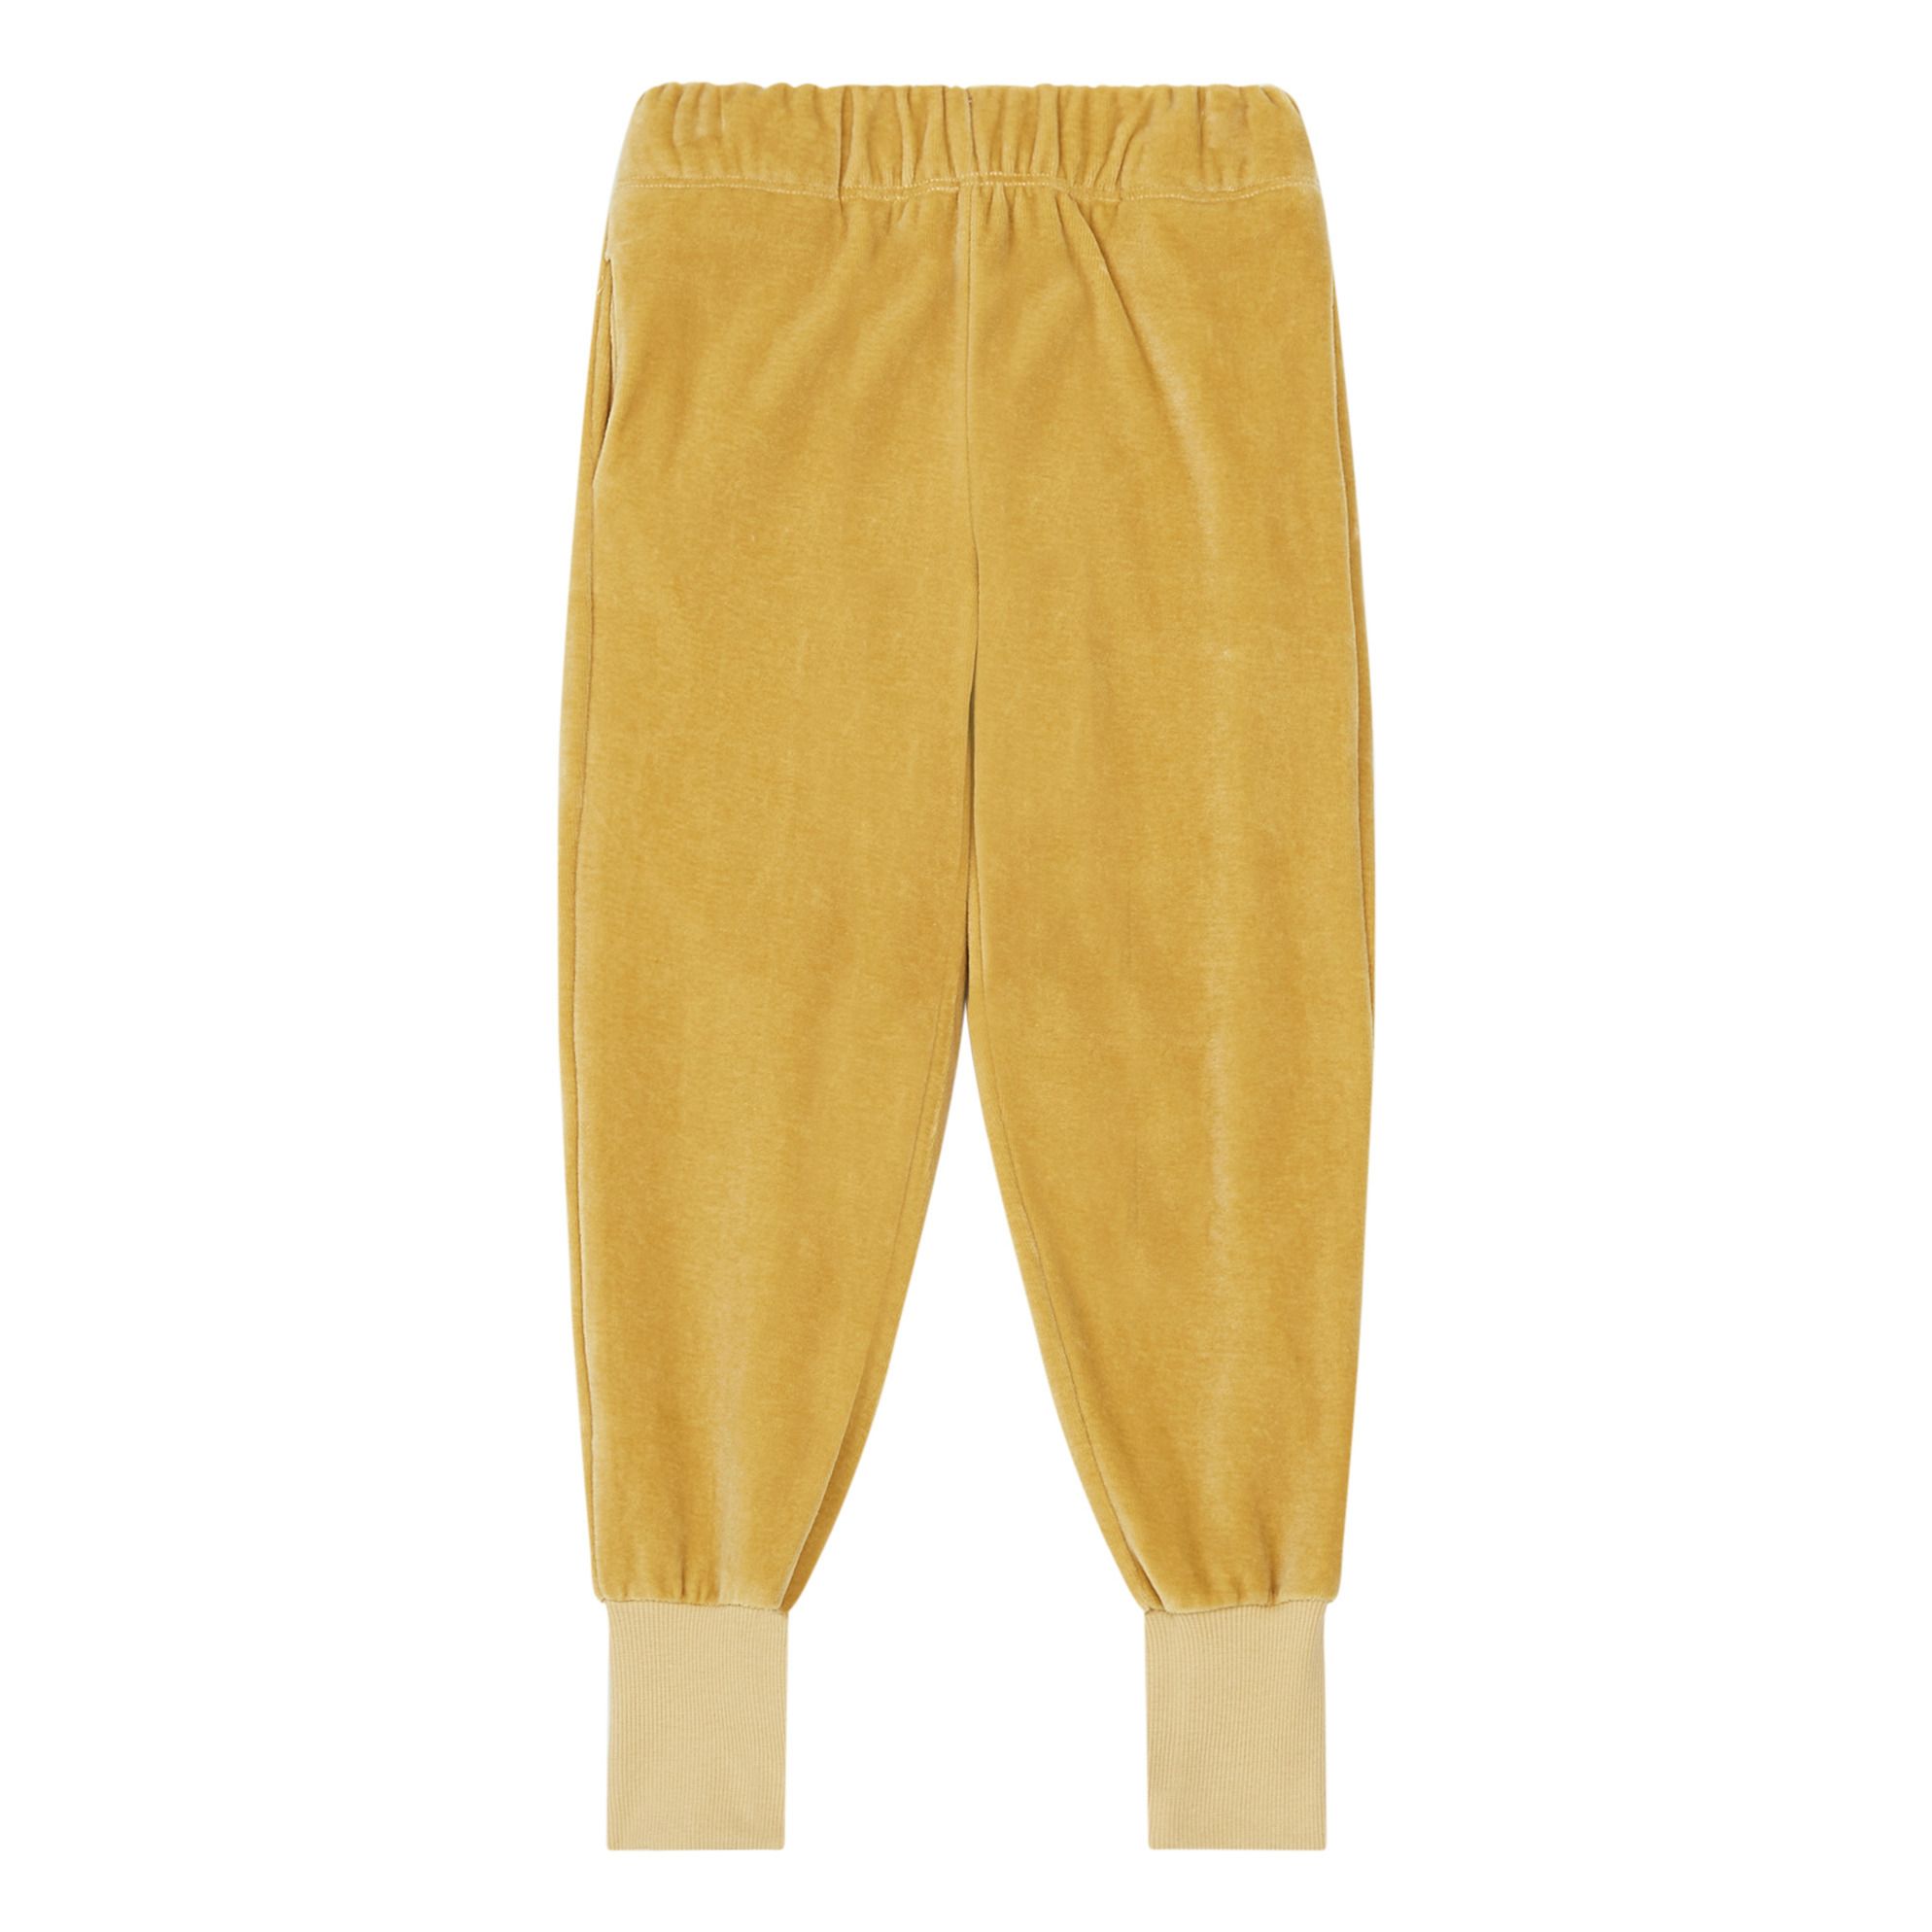 We Are Kids - Jogg Charles Velours Coton Bio - Fille - Jaune